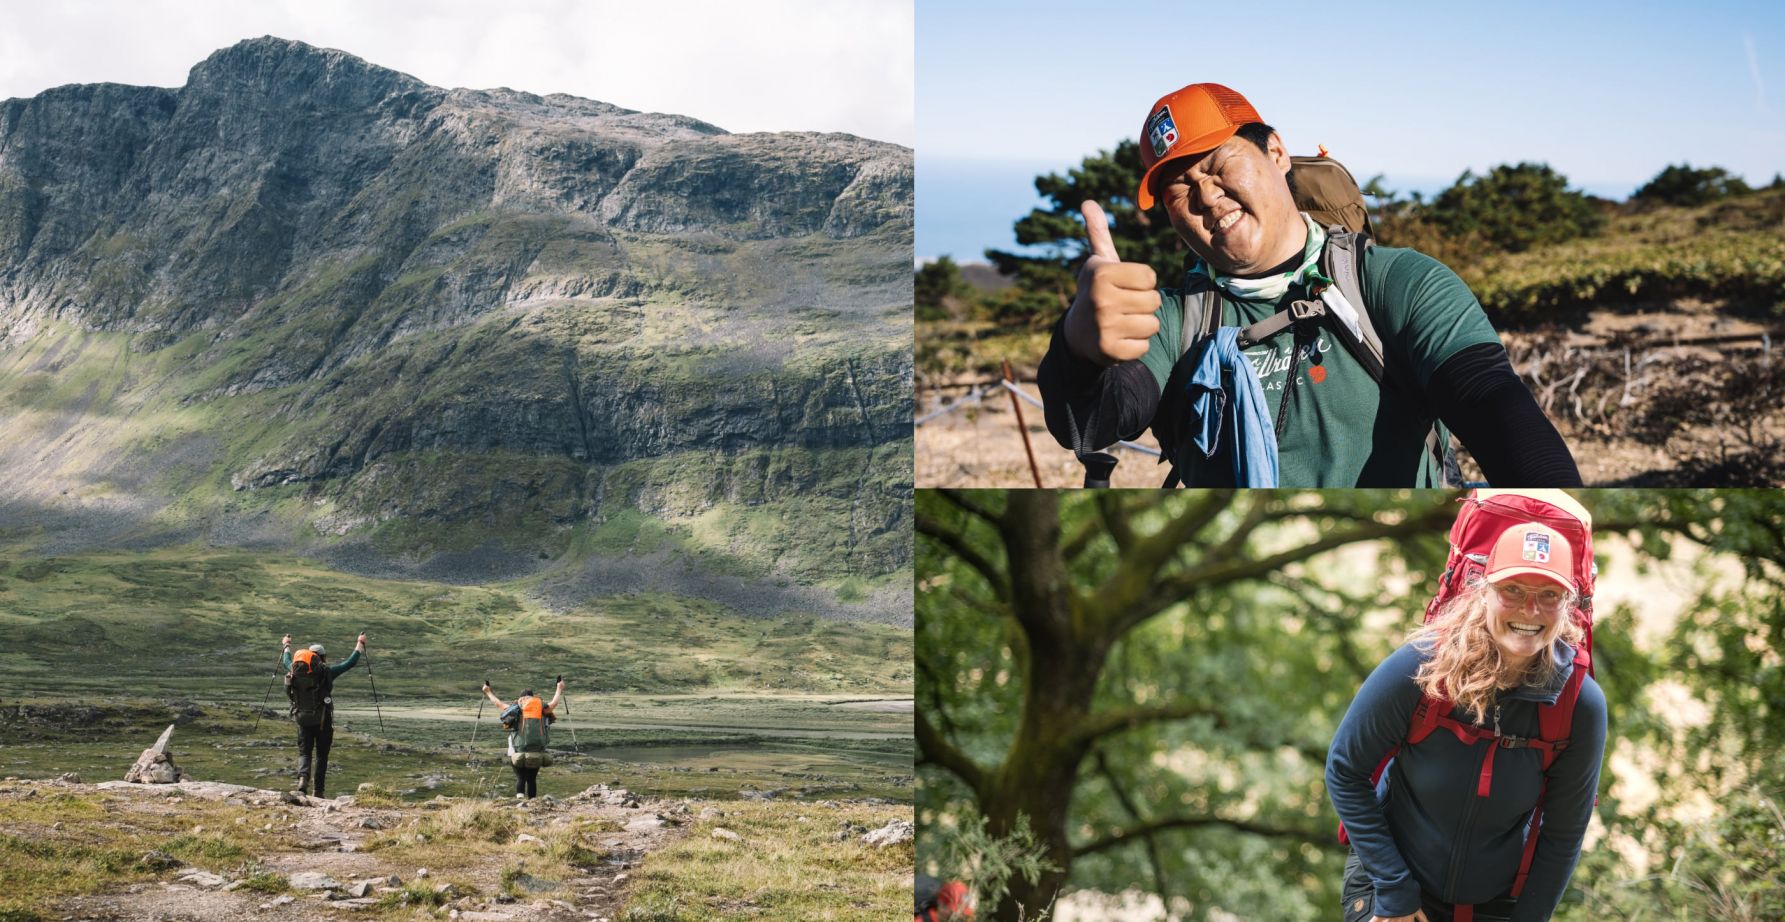 Fjällräven - Want to become a Fjällräven trekking product tester? If you  live in Europe, this is your chance. Tell us why we should pick you, in no  more than 50 words